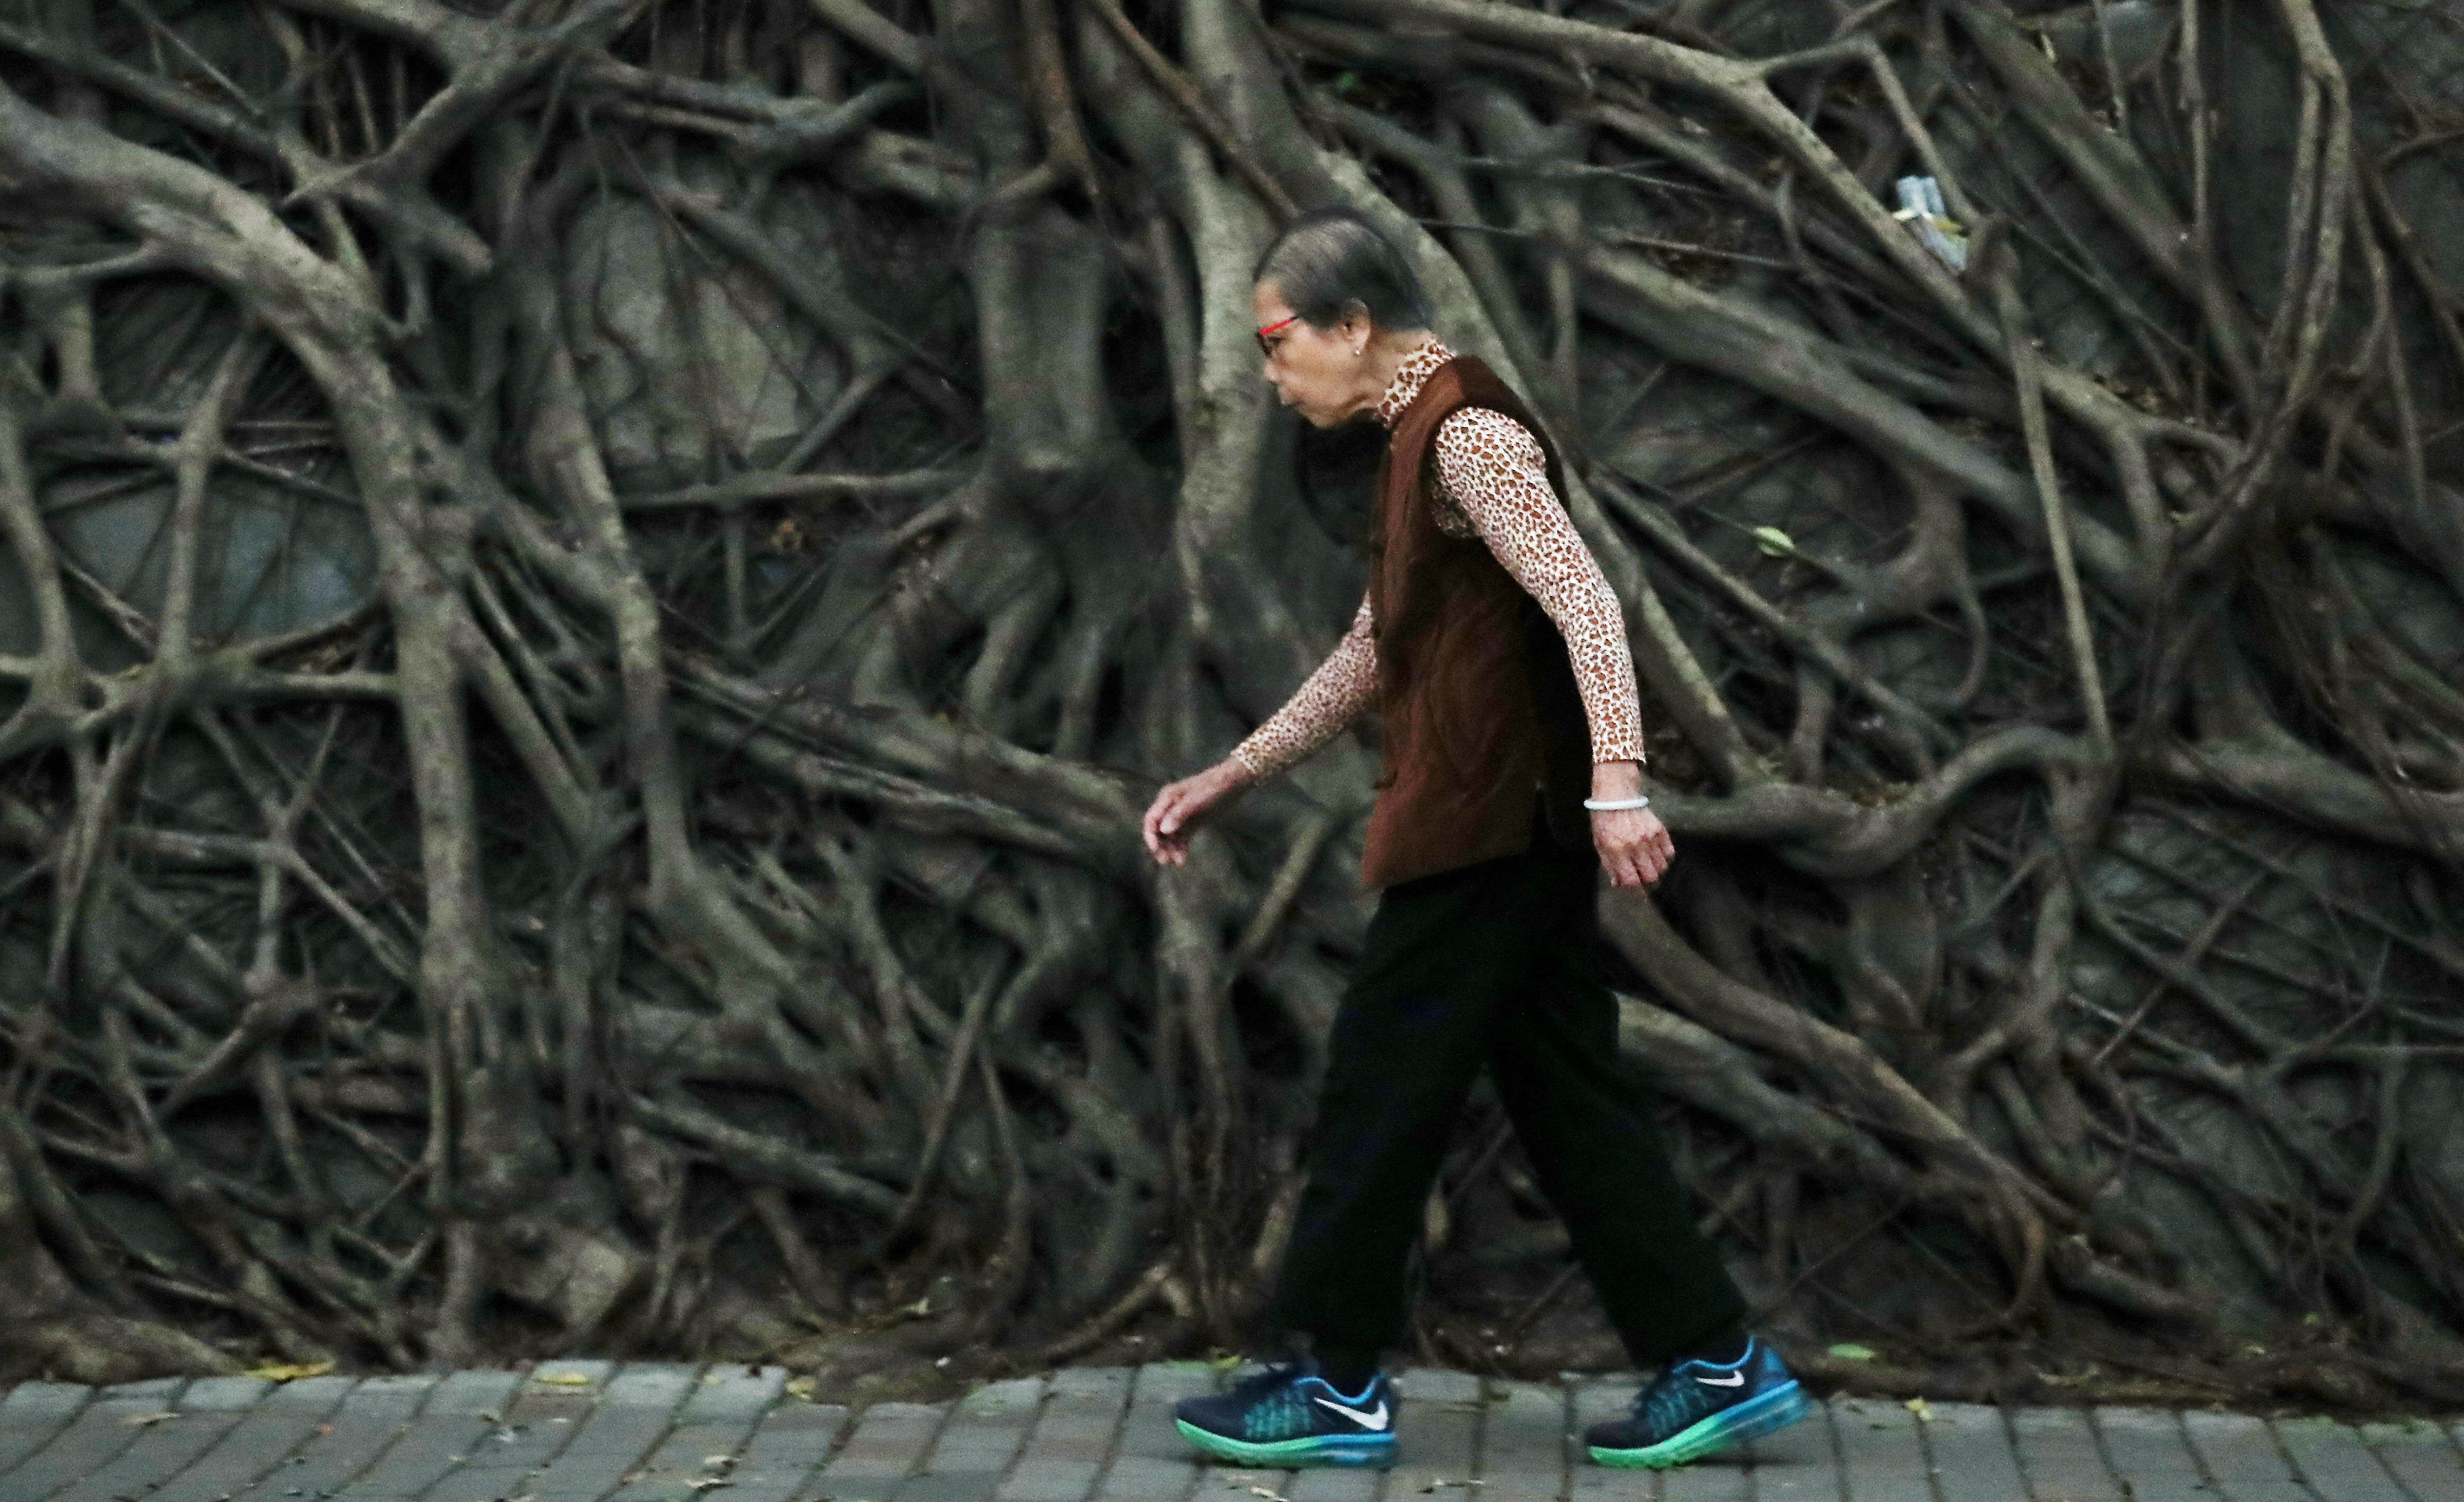 An elderly woman walks past a root-covered wall in Kennedy Town in April 2017. Roughly 18 per cent of Hong Kong’s population are aged over 65. Photo: Nora Tam